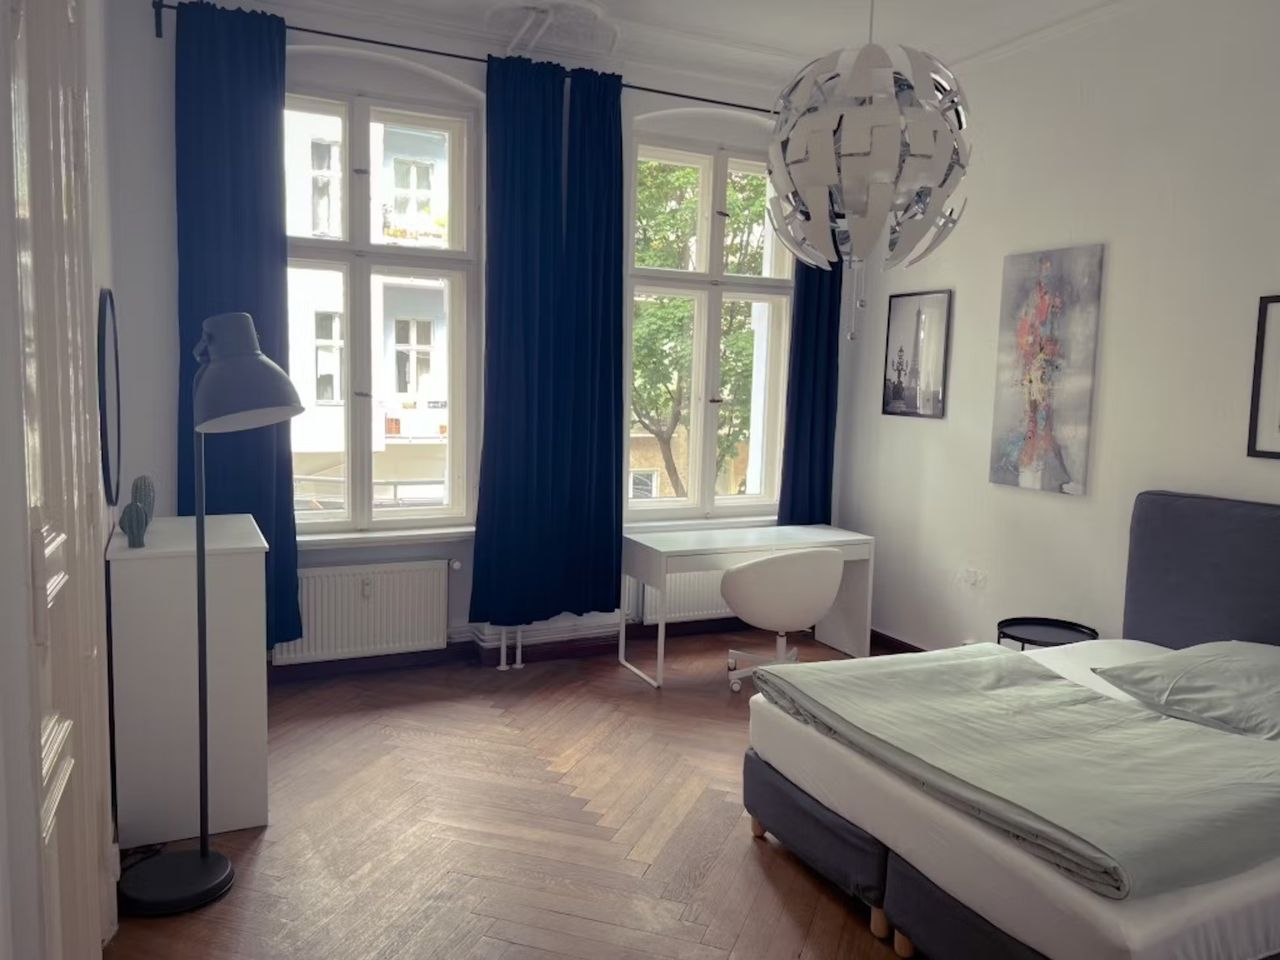 3 bedroom Luxurious apartment close to Berlin Mitte!!